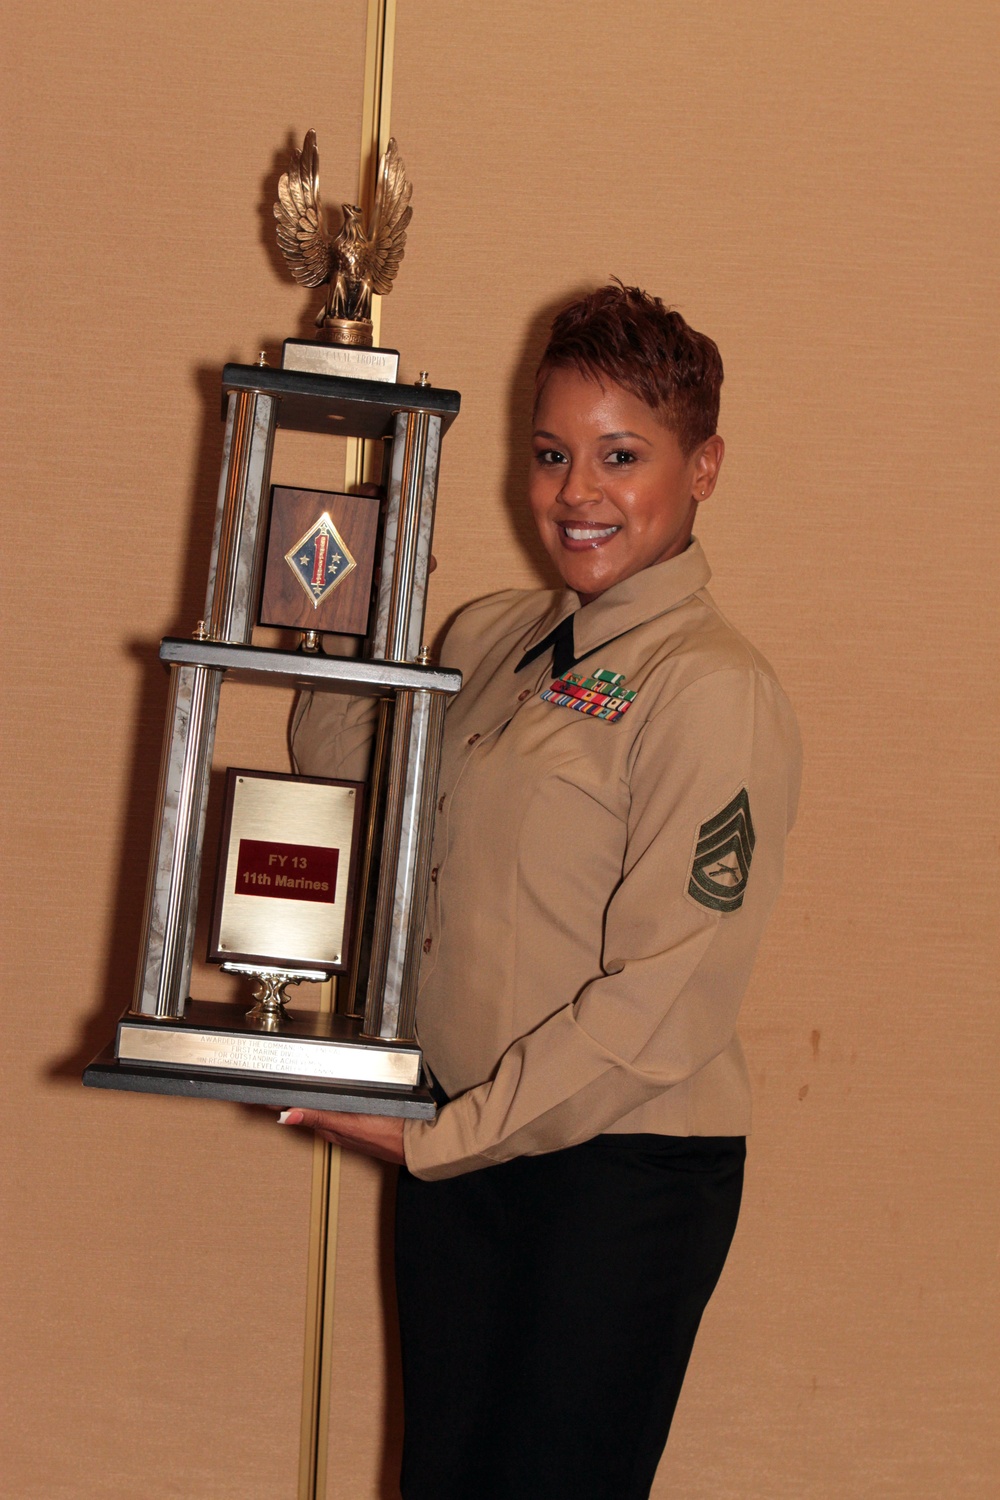 Axton native, U.S. Marine recognized for accomplishments as career planner